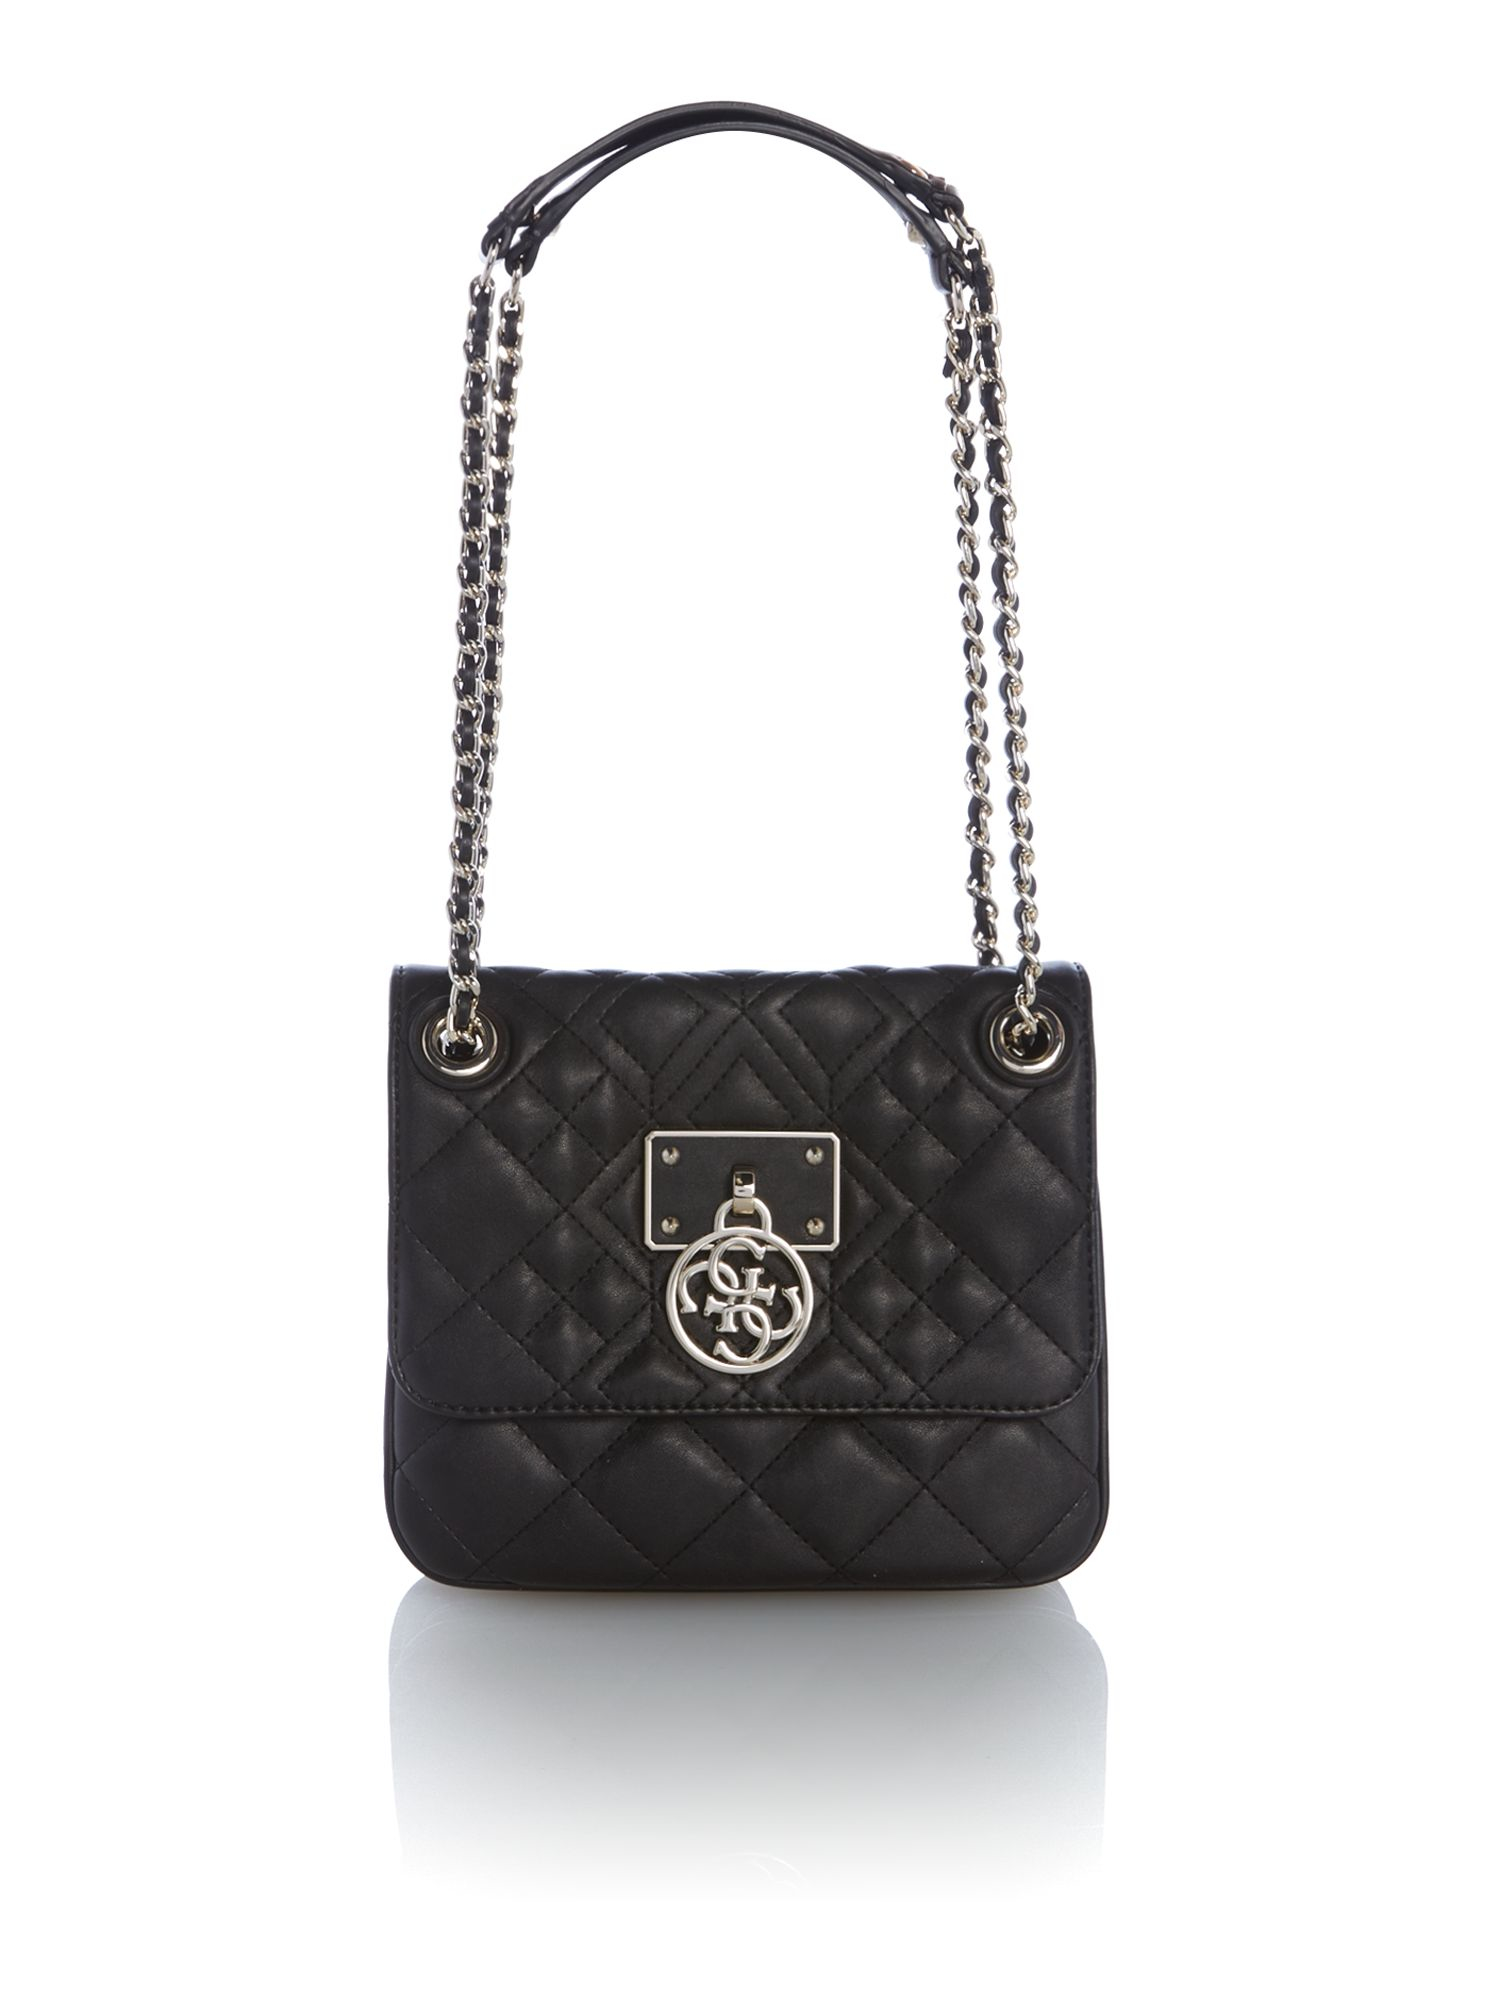 Guess Aliza Quilted Convertible Crossbody Bag in Black | Lyst